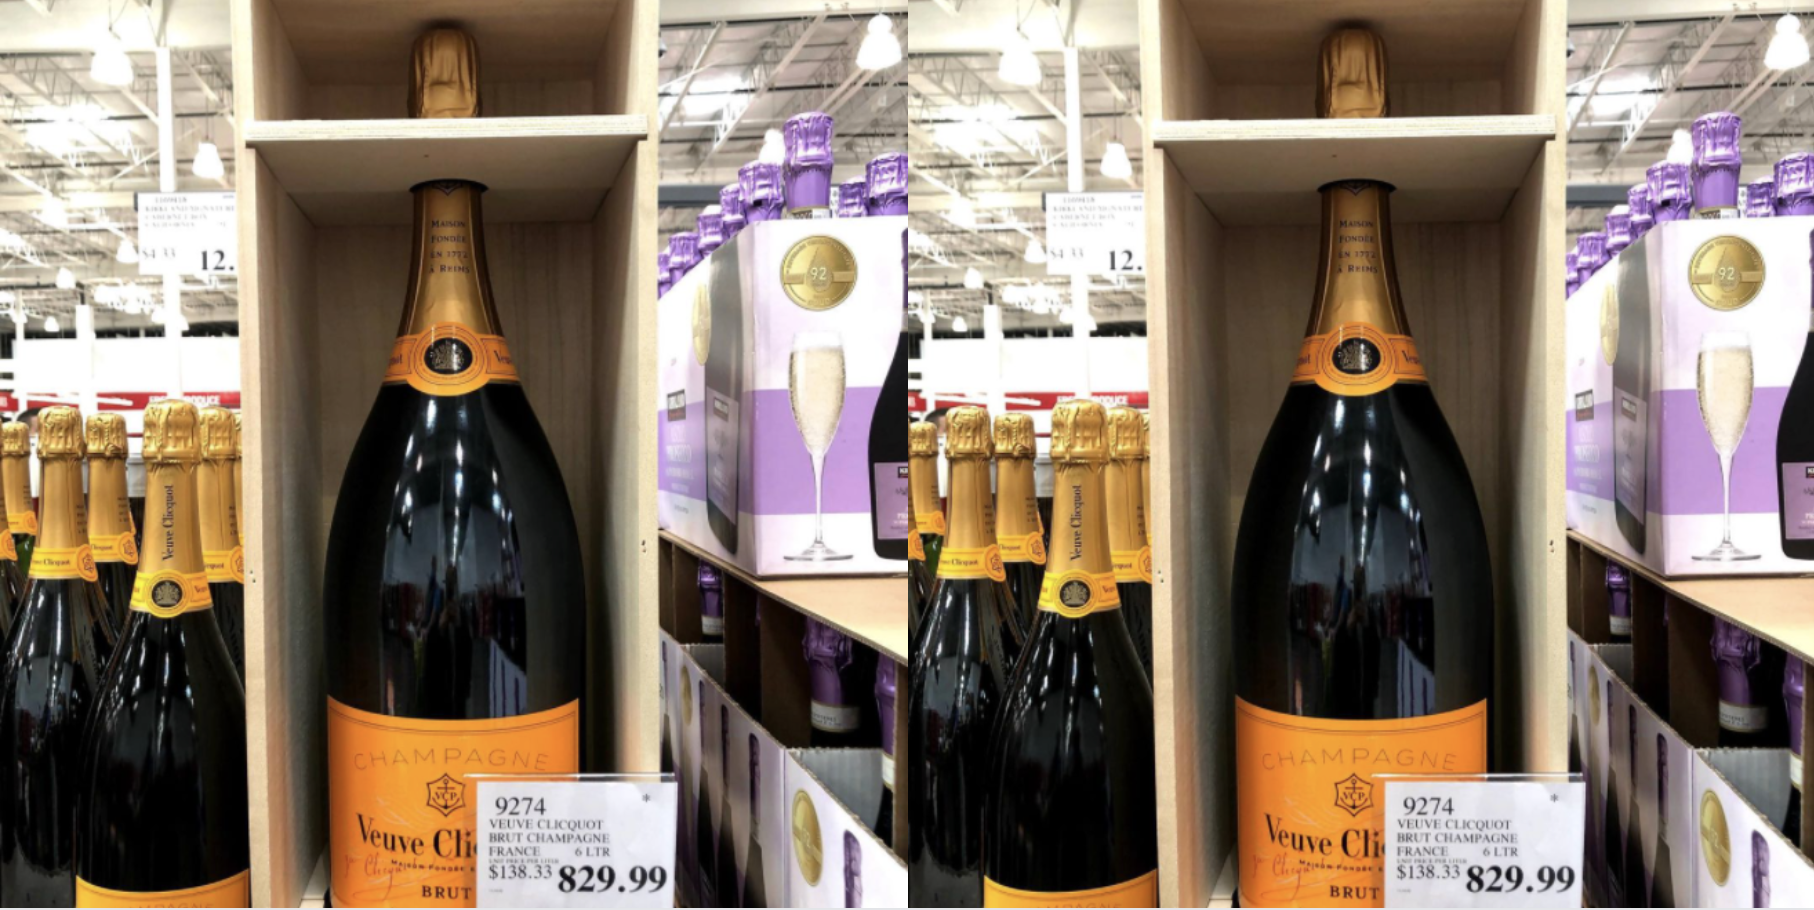 Big format bottles stand tall at Costco